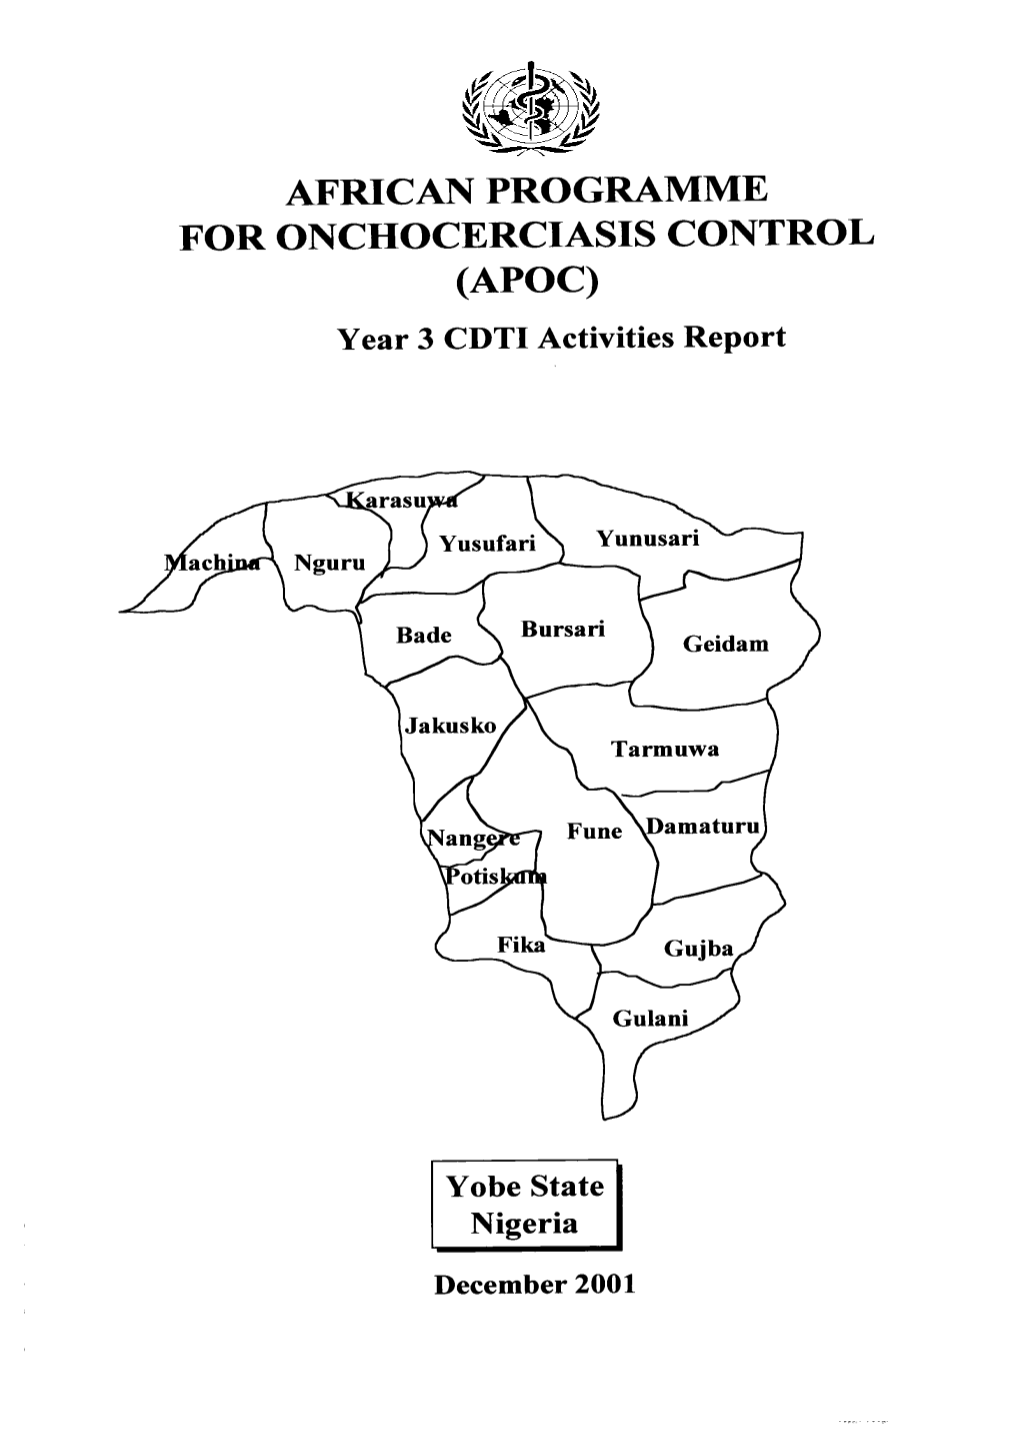 AFRICAI\ PROGRAMME for ONCHOCERCIASIS CONTROL (Apoc)